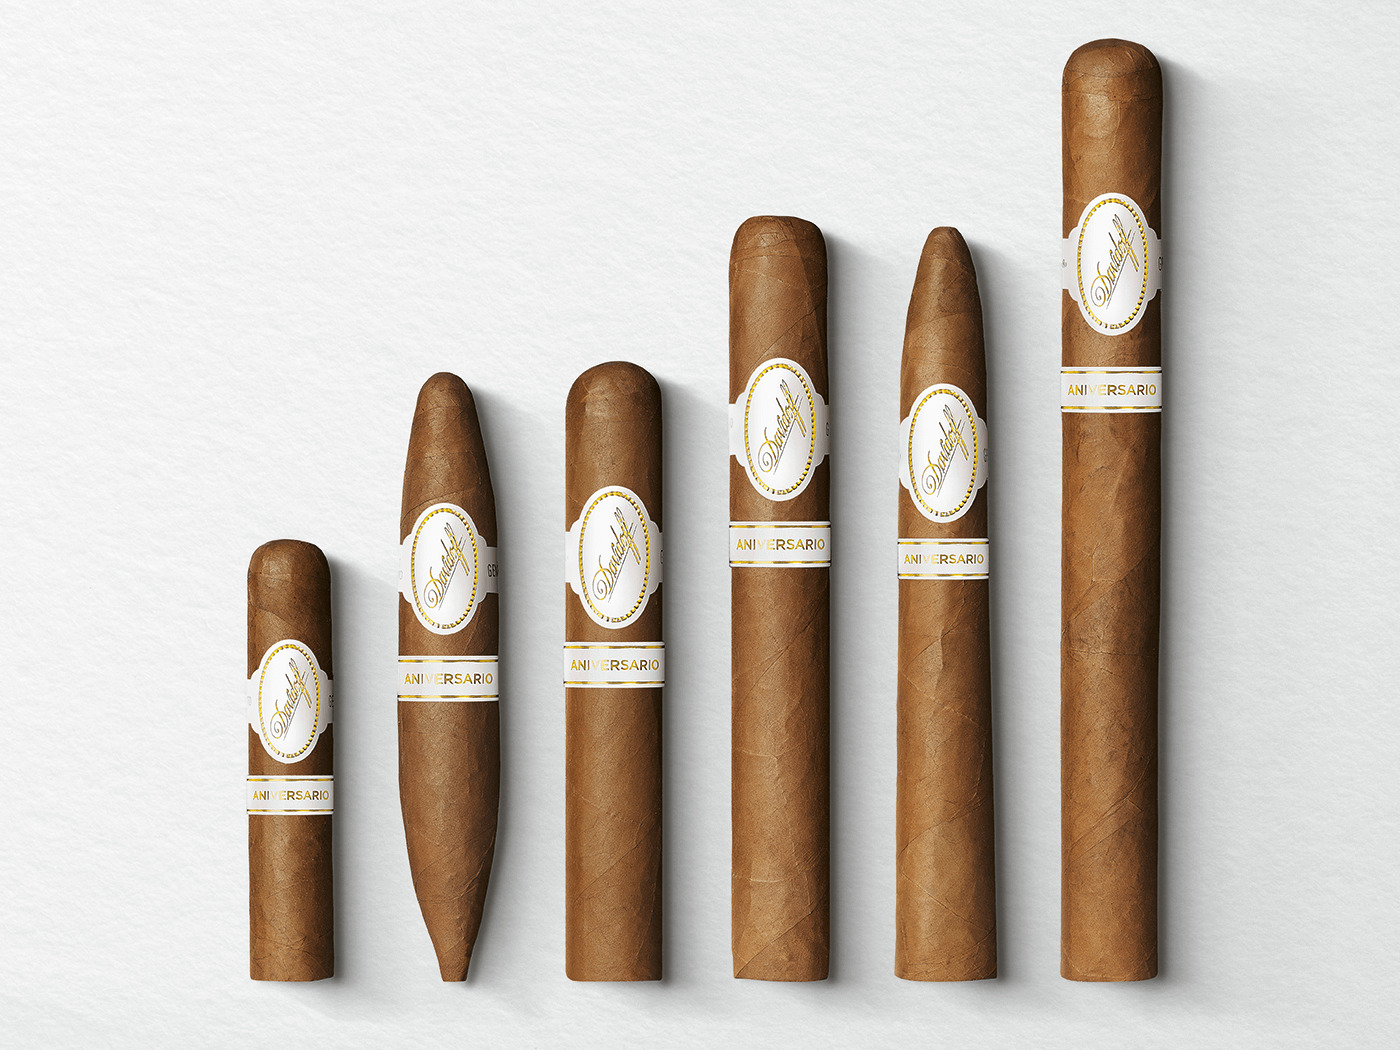 The 6 different formats of the Davidoff Aniversario line shown next to one another.